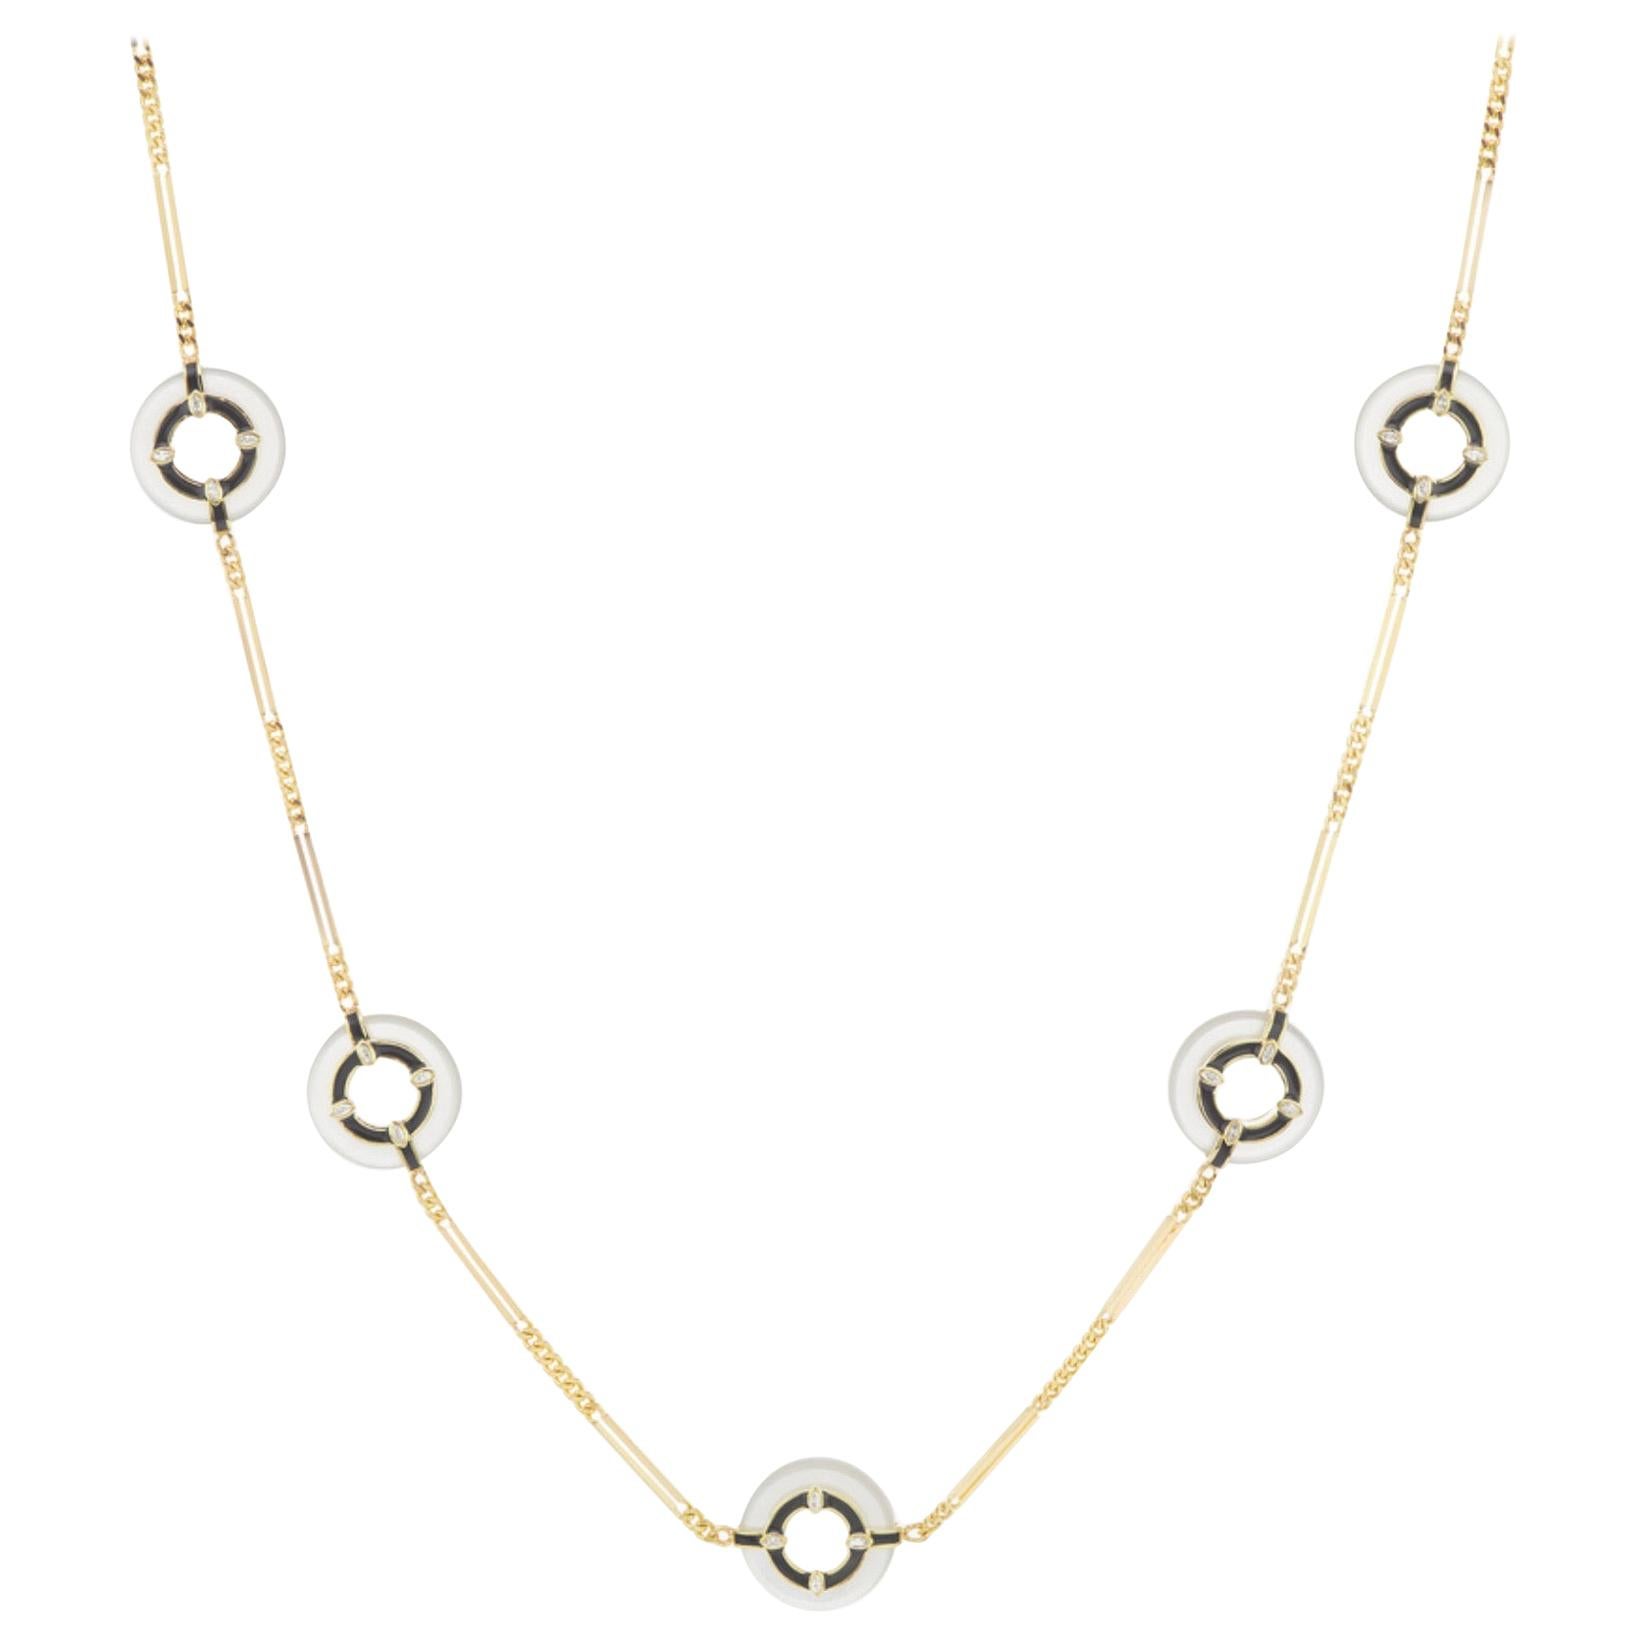 Rock Crystal, Marquise Diamond and Black Enamel Reversible Necklace in 18K